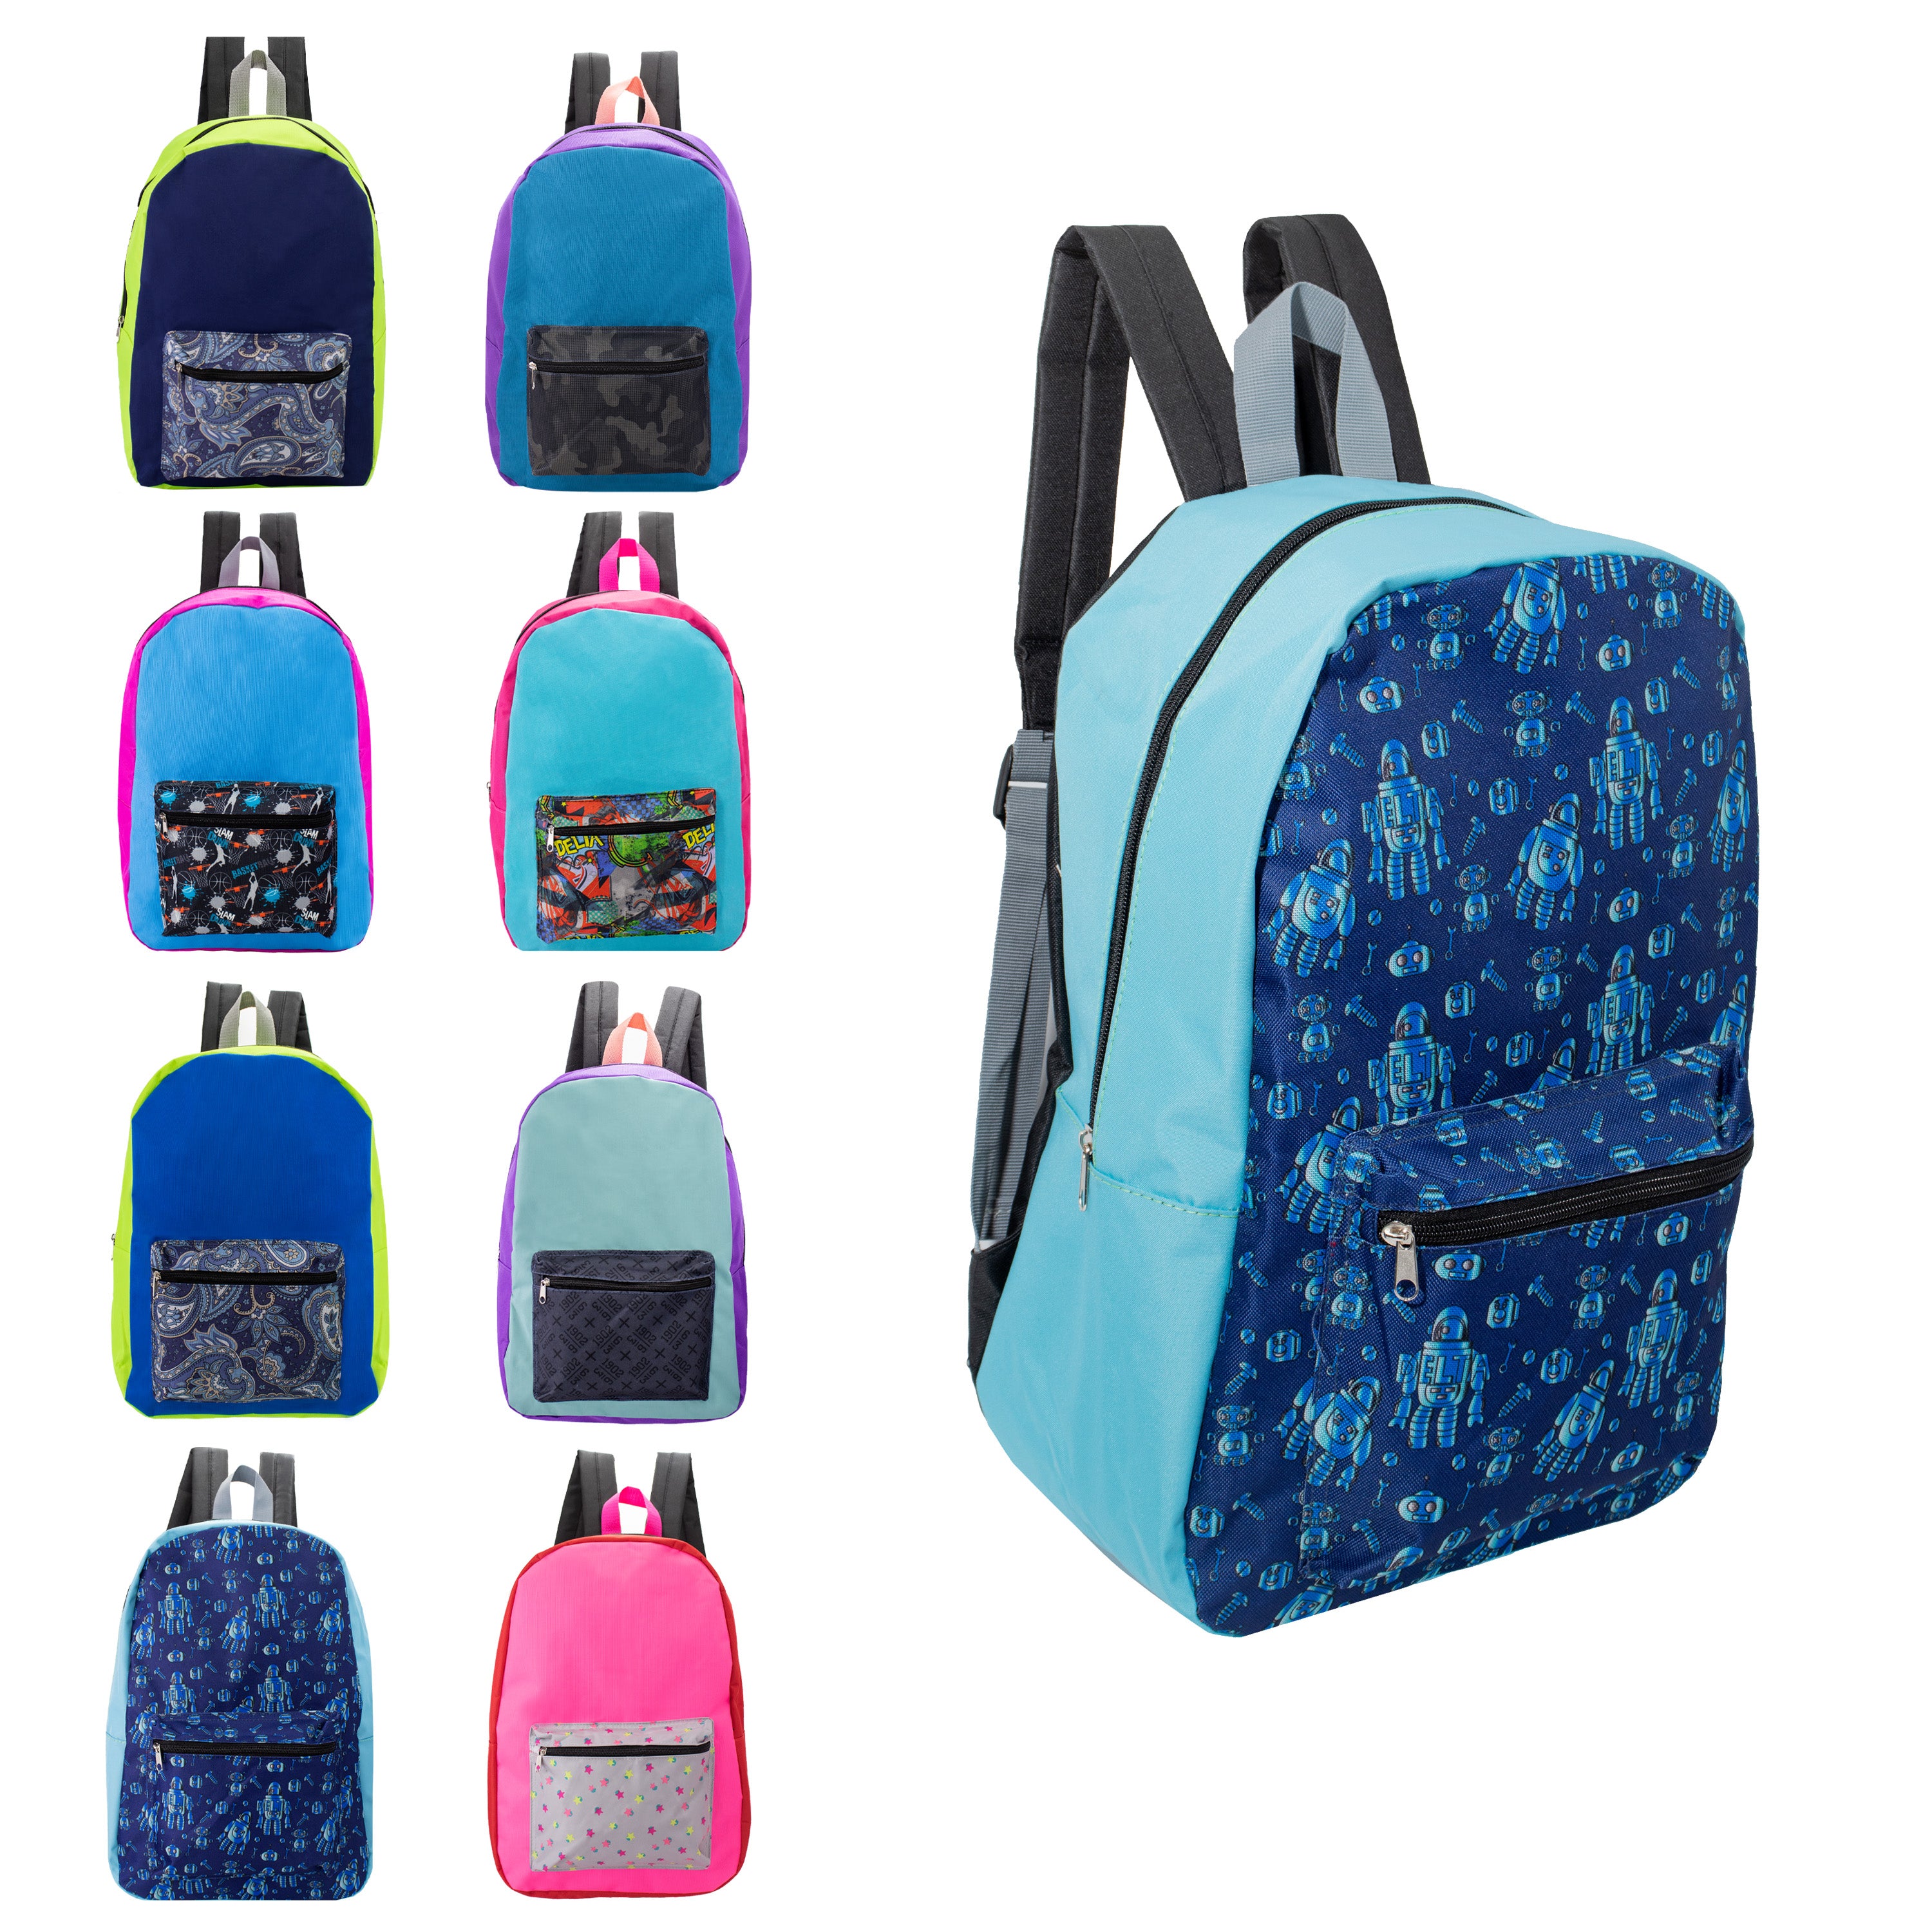 17 inches School Backpacks for Kids In Assorted Prints Bulk School Supplies - Kit Case Of 12